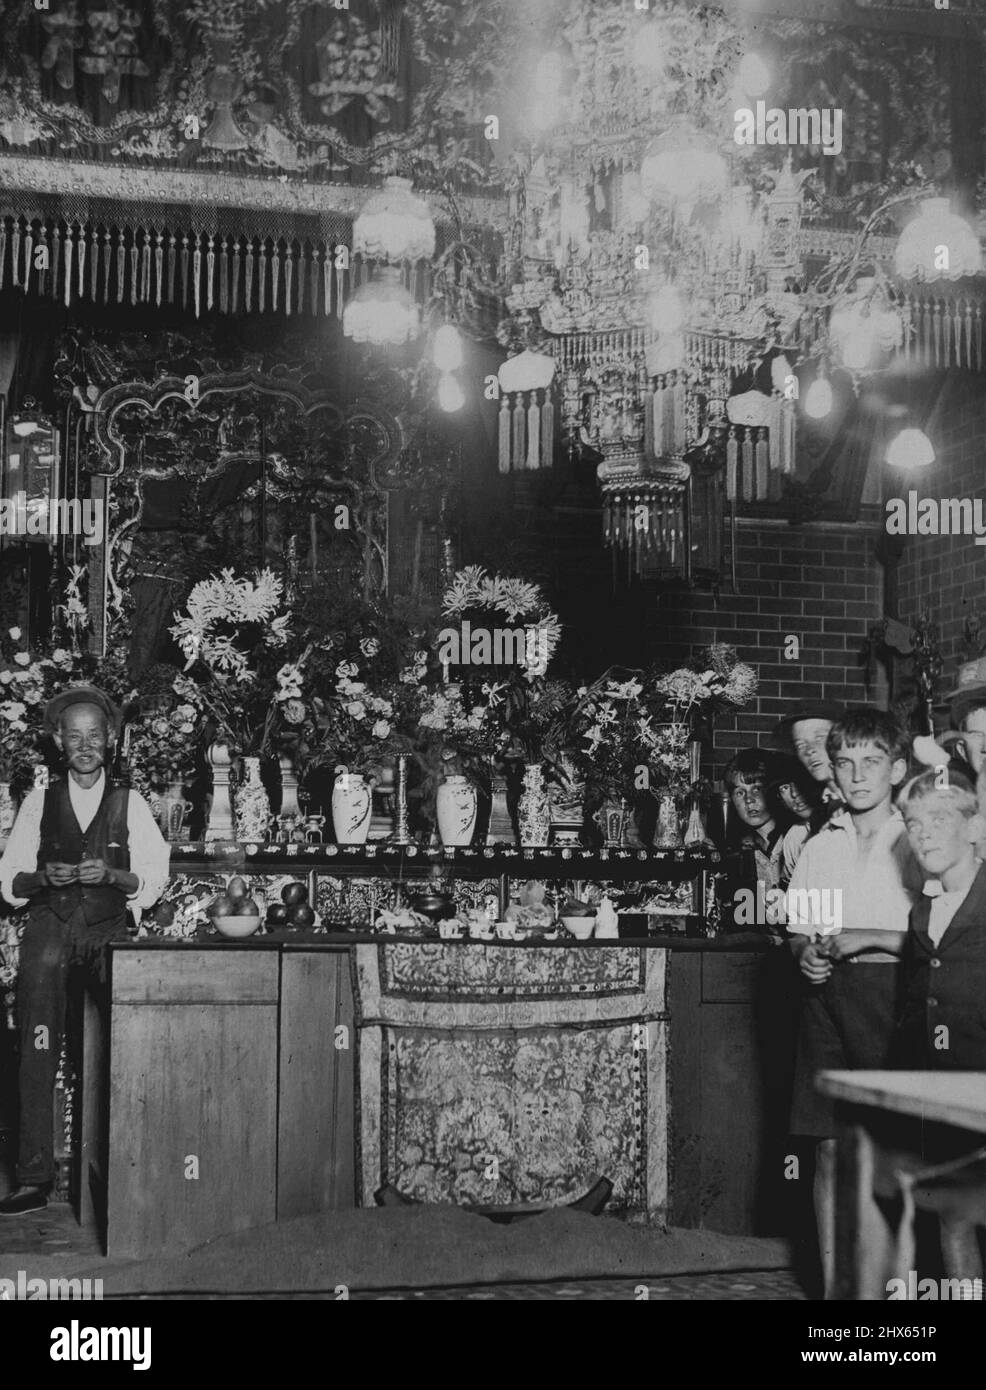 Food For Their Gods - Offerings Of Food set upon the elaborate altar in the Retreat Street Joss House last night to symbolise the devotion of the Chinese to Confucius. Hundreds gather to witness the picturesque opening celebrations of the Chinese New Year. January 01, 1932. Stock Photo